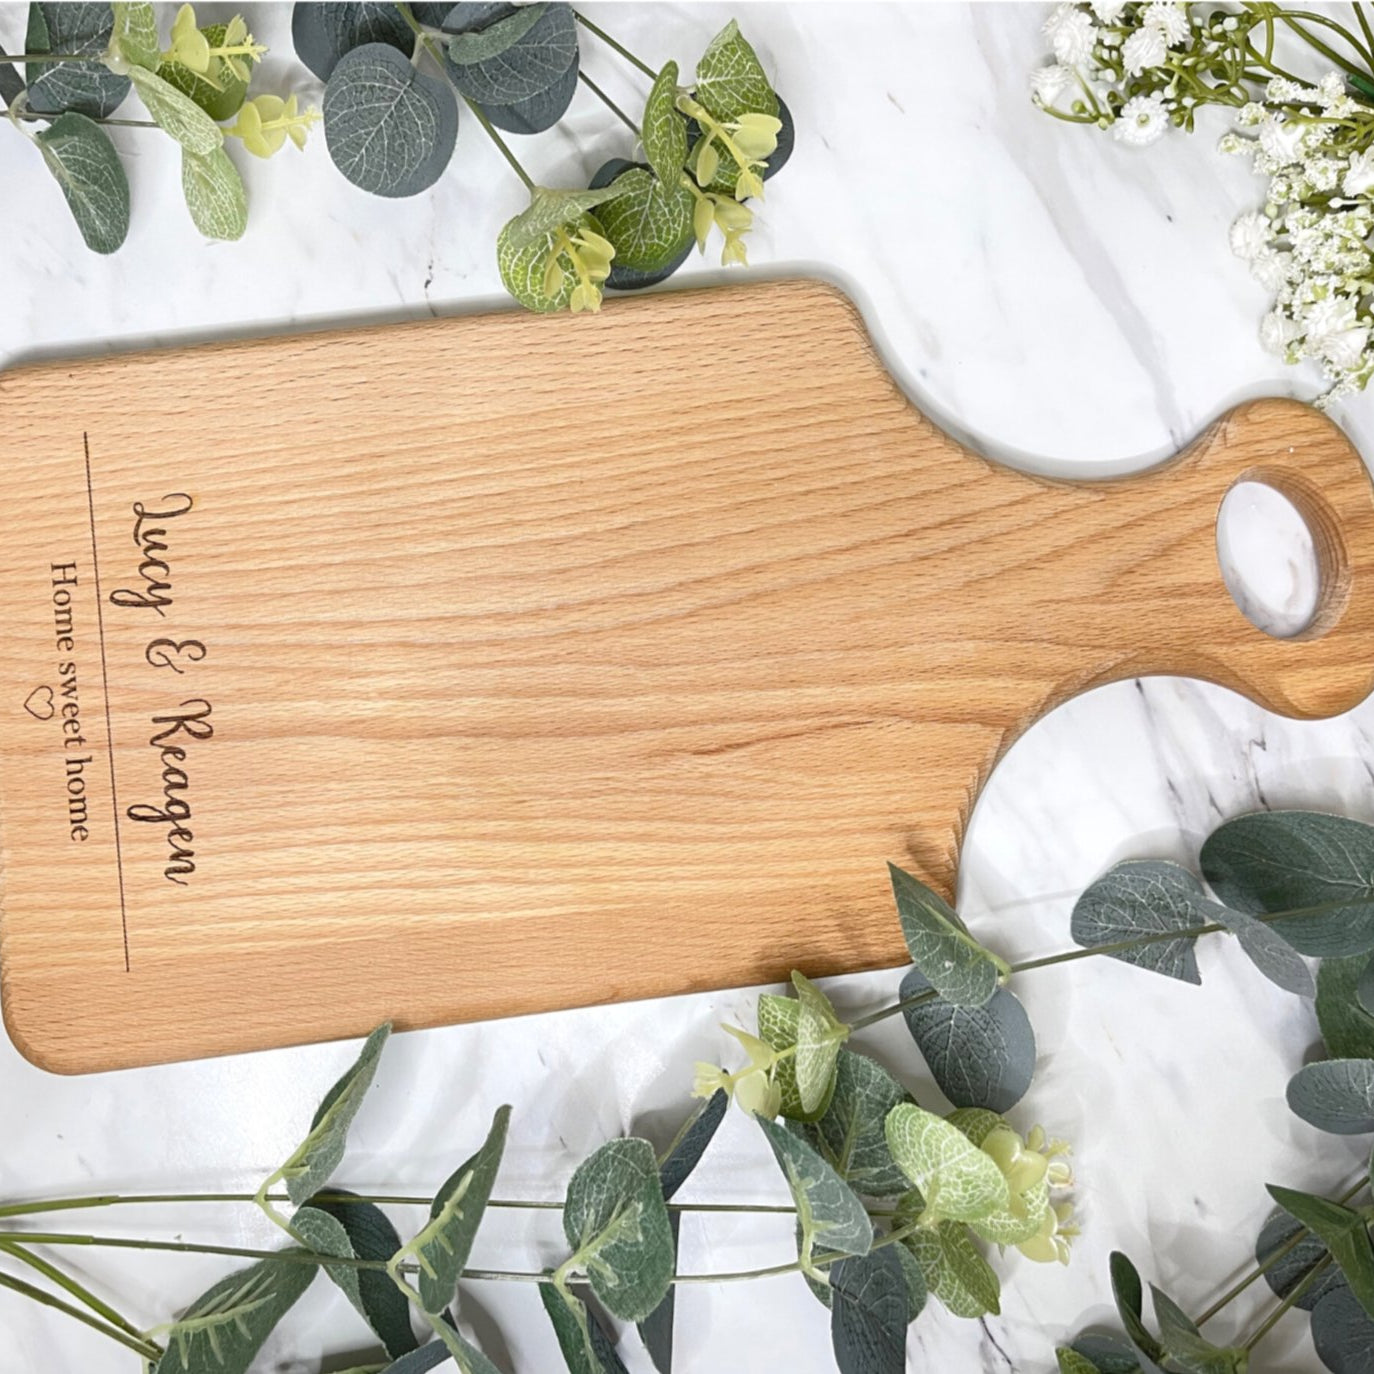 Exquisite wooden serving board, meticulously personalized with the endearing inscription 'Home Sweet Home' encircled by an intricately etched heart motif. An impeccable gift choice to celebrate housewarmings, weddings, anniversaries, birthdays, or expressions of gratitude.